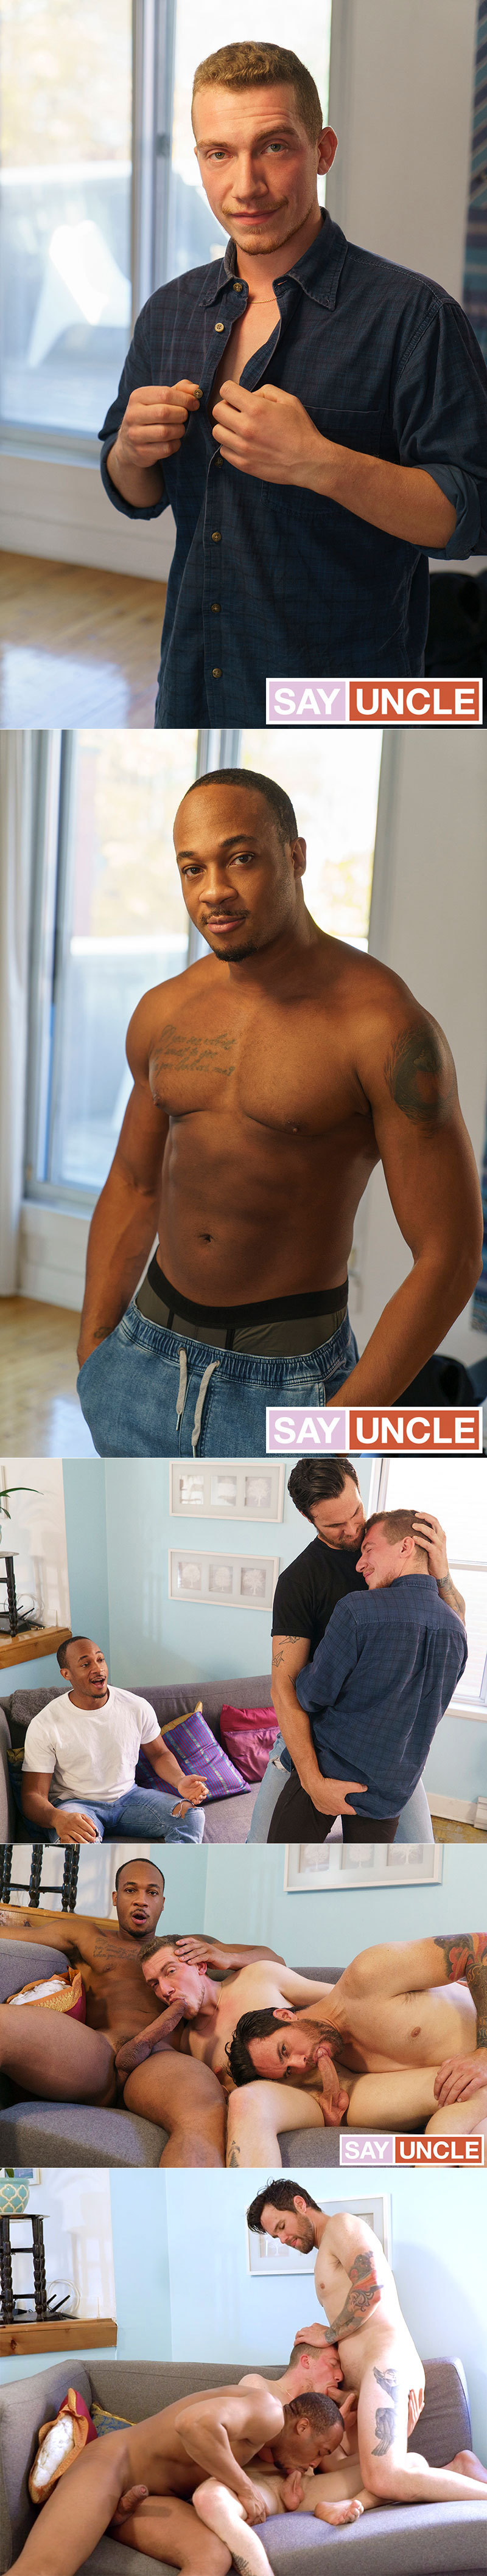 DadCreep: Beau Reed and Trent King tag team William Moore raw in "Uncle Stopped by"